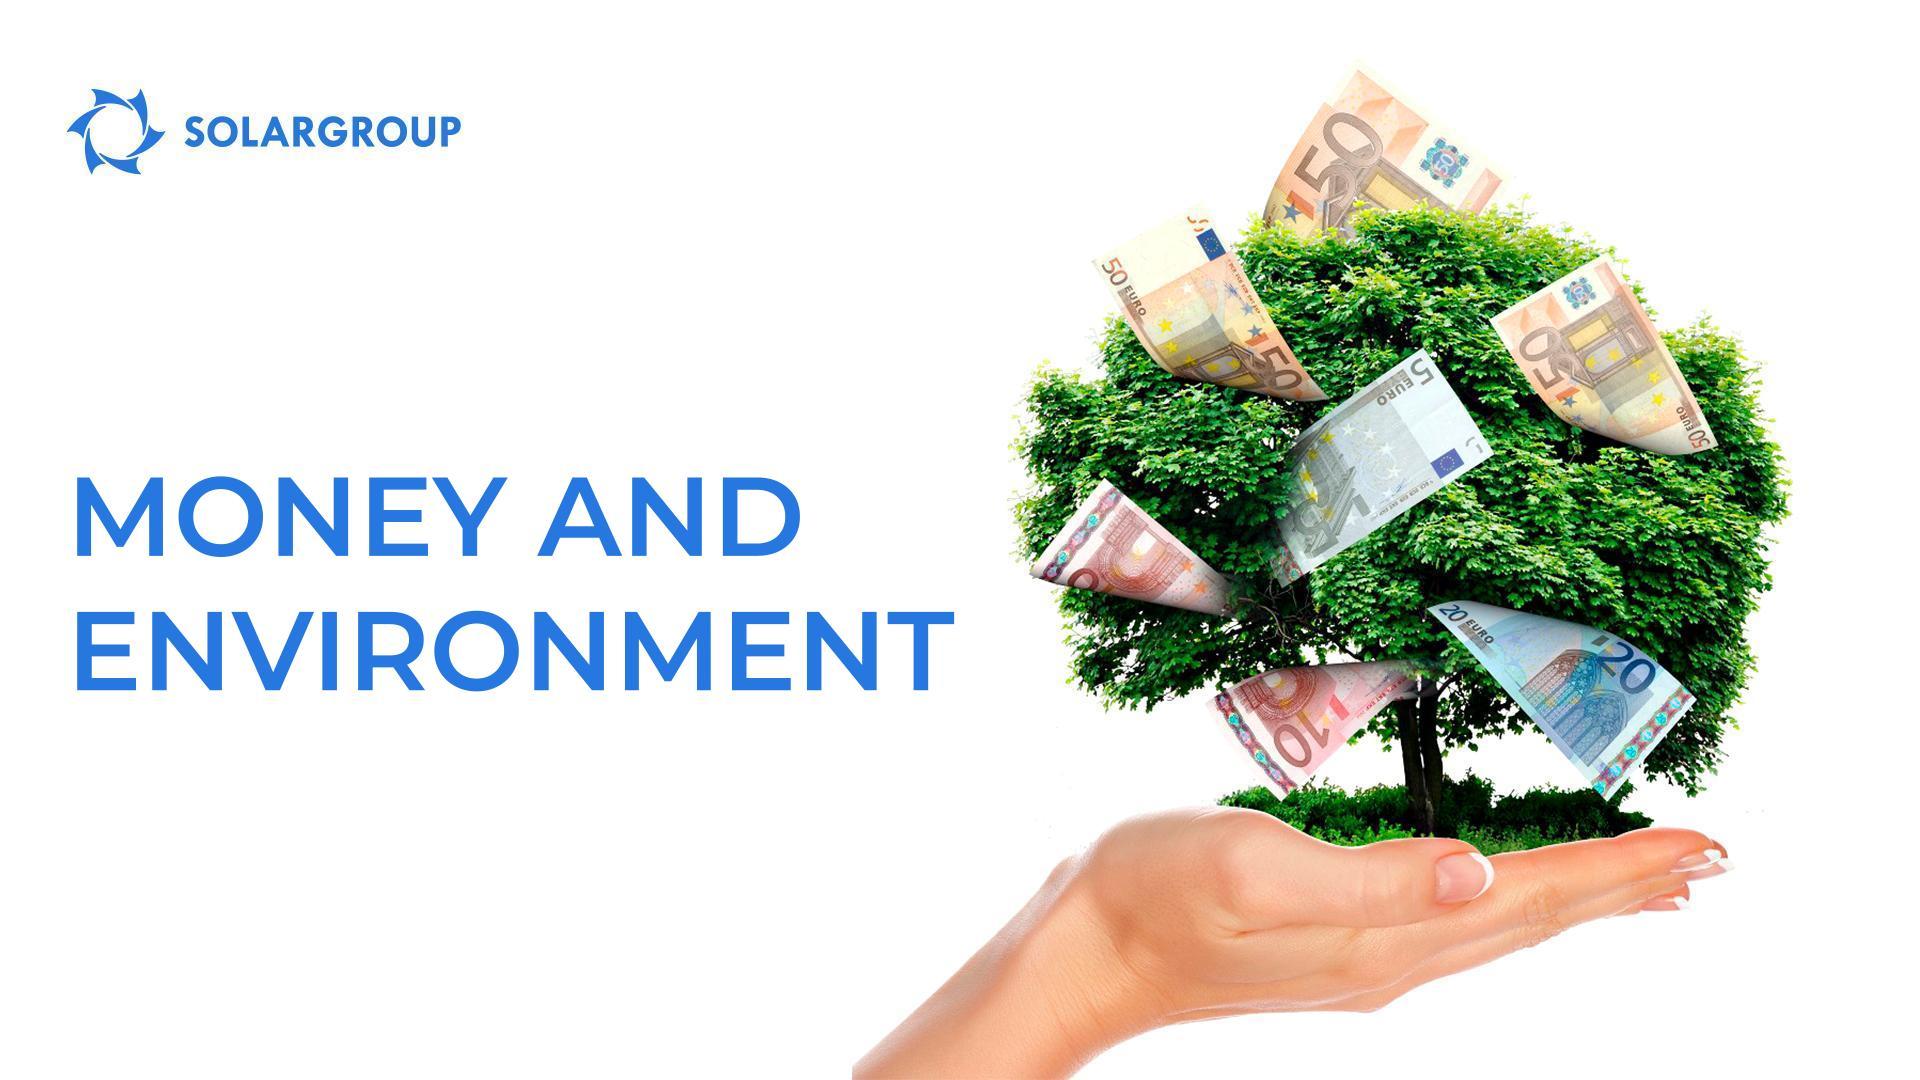 Money and environment